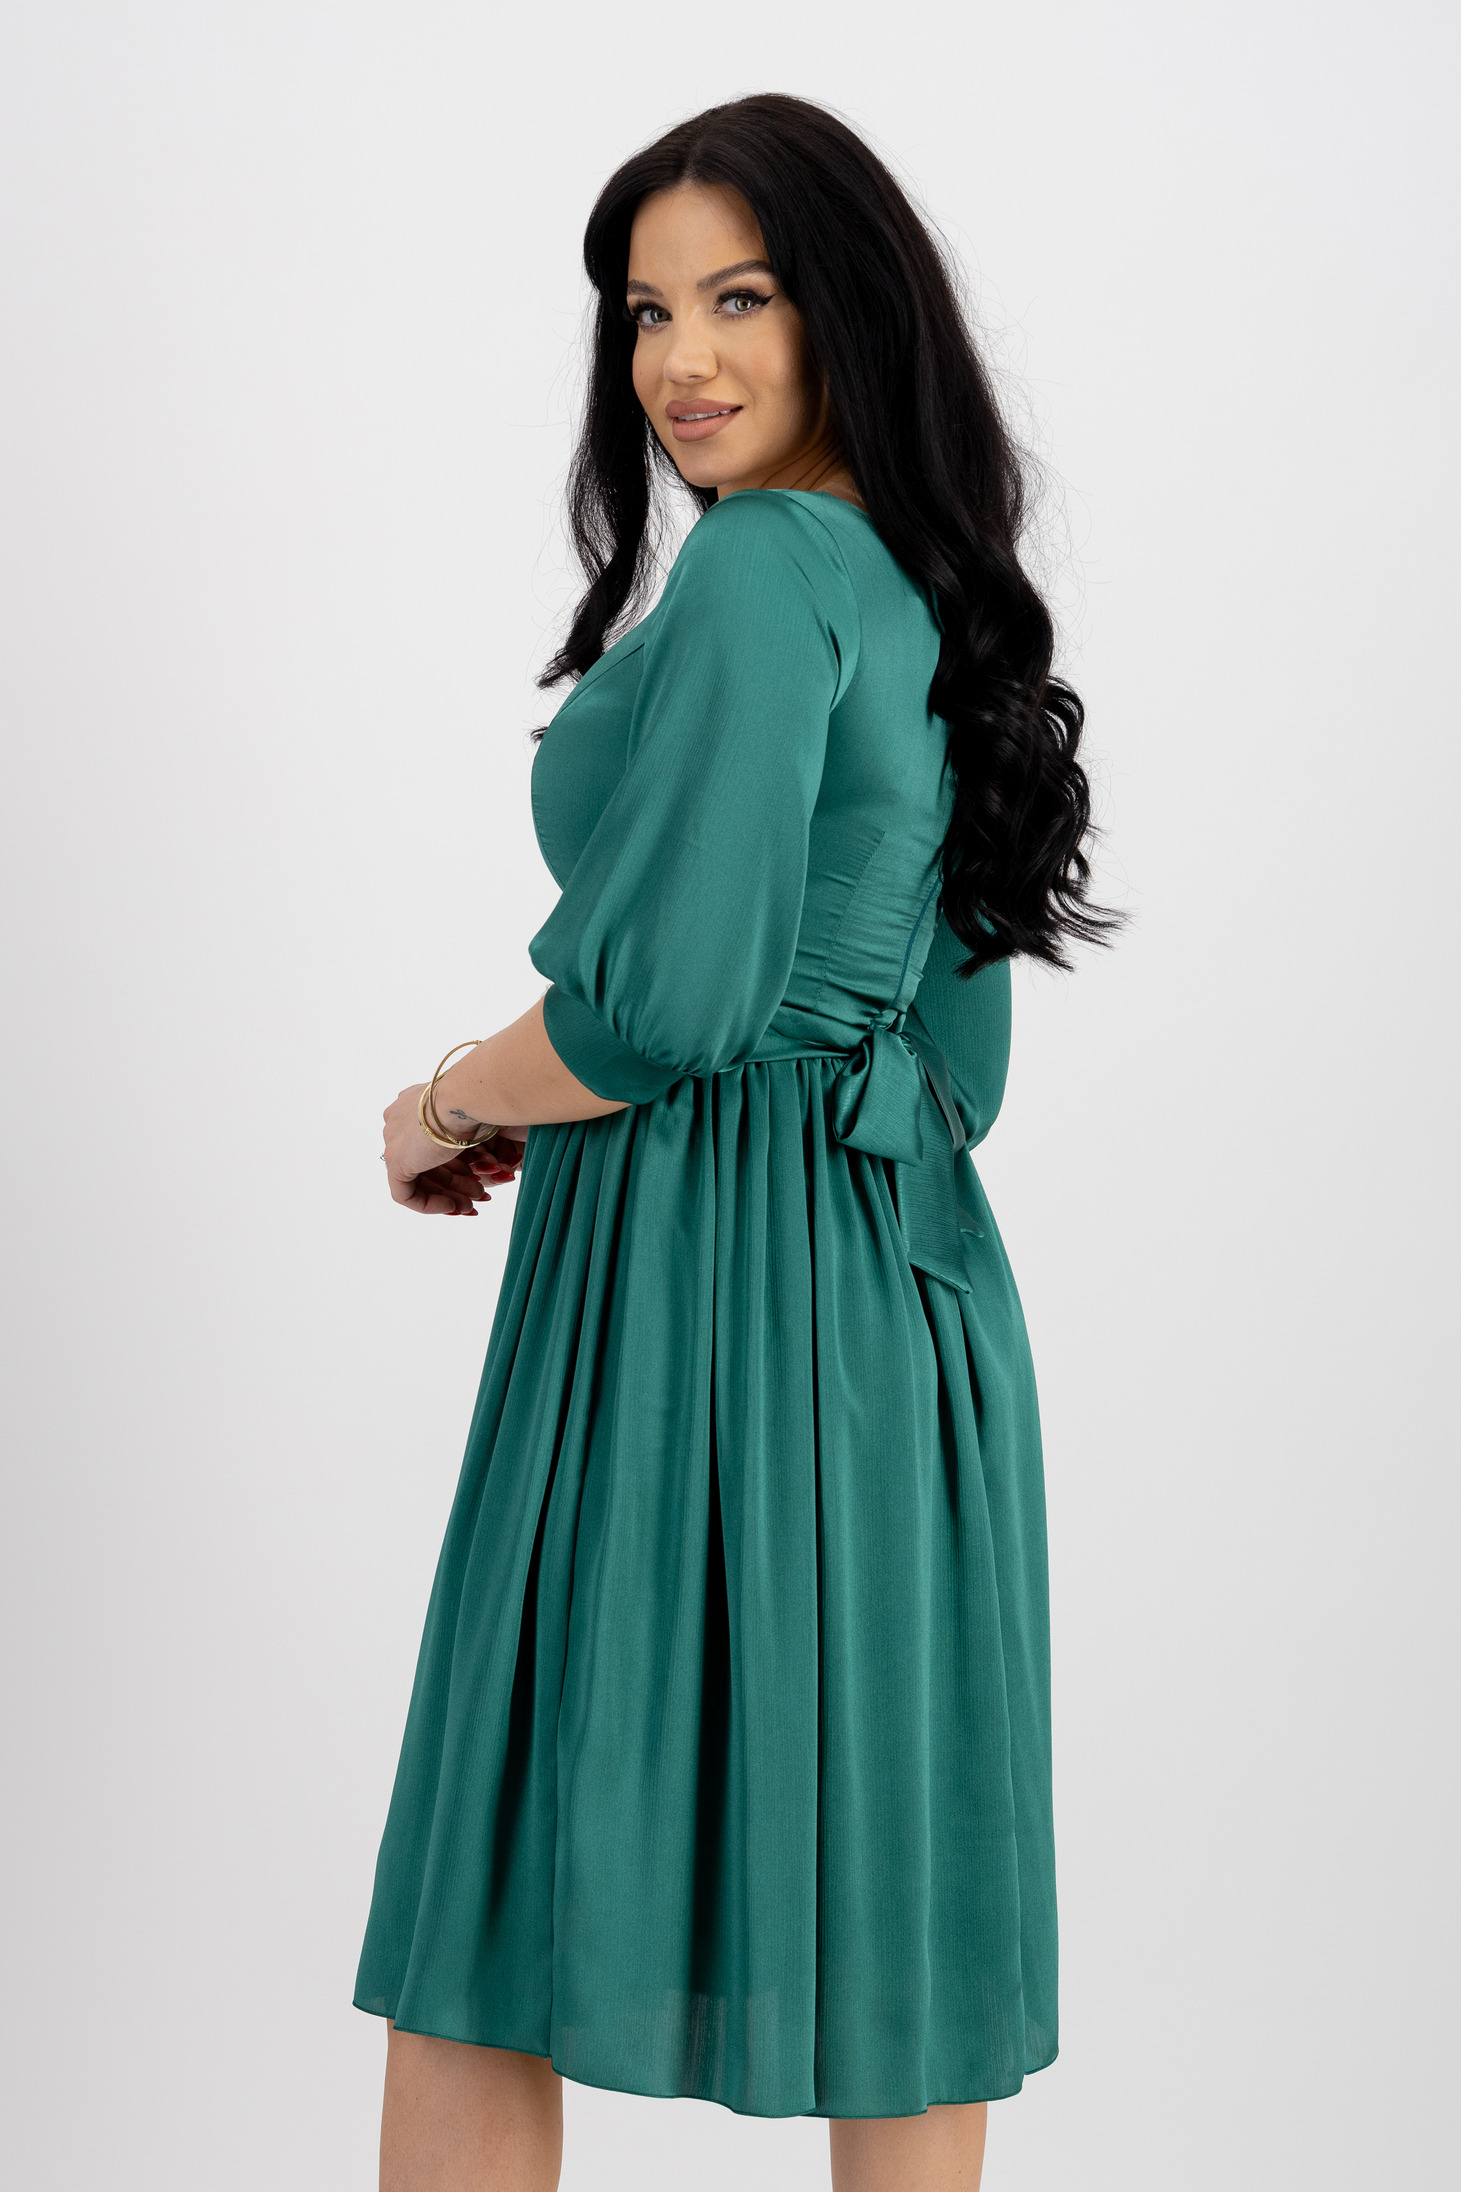 Green Satin Midi Dress in A-line with Pearl Embellishments on Cord - StarShinerS 2 - StarShinerS.com